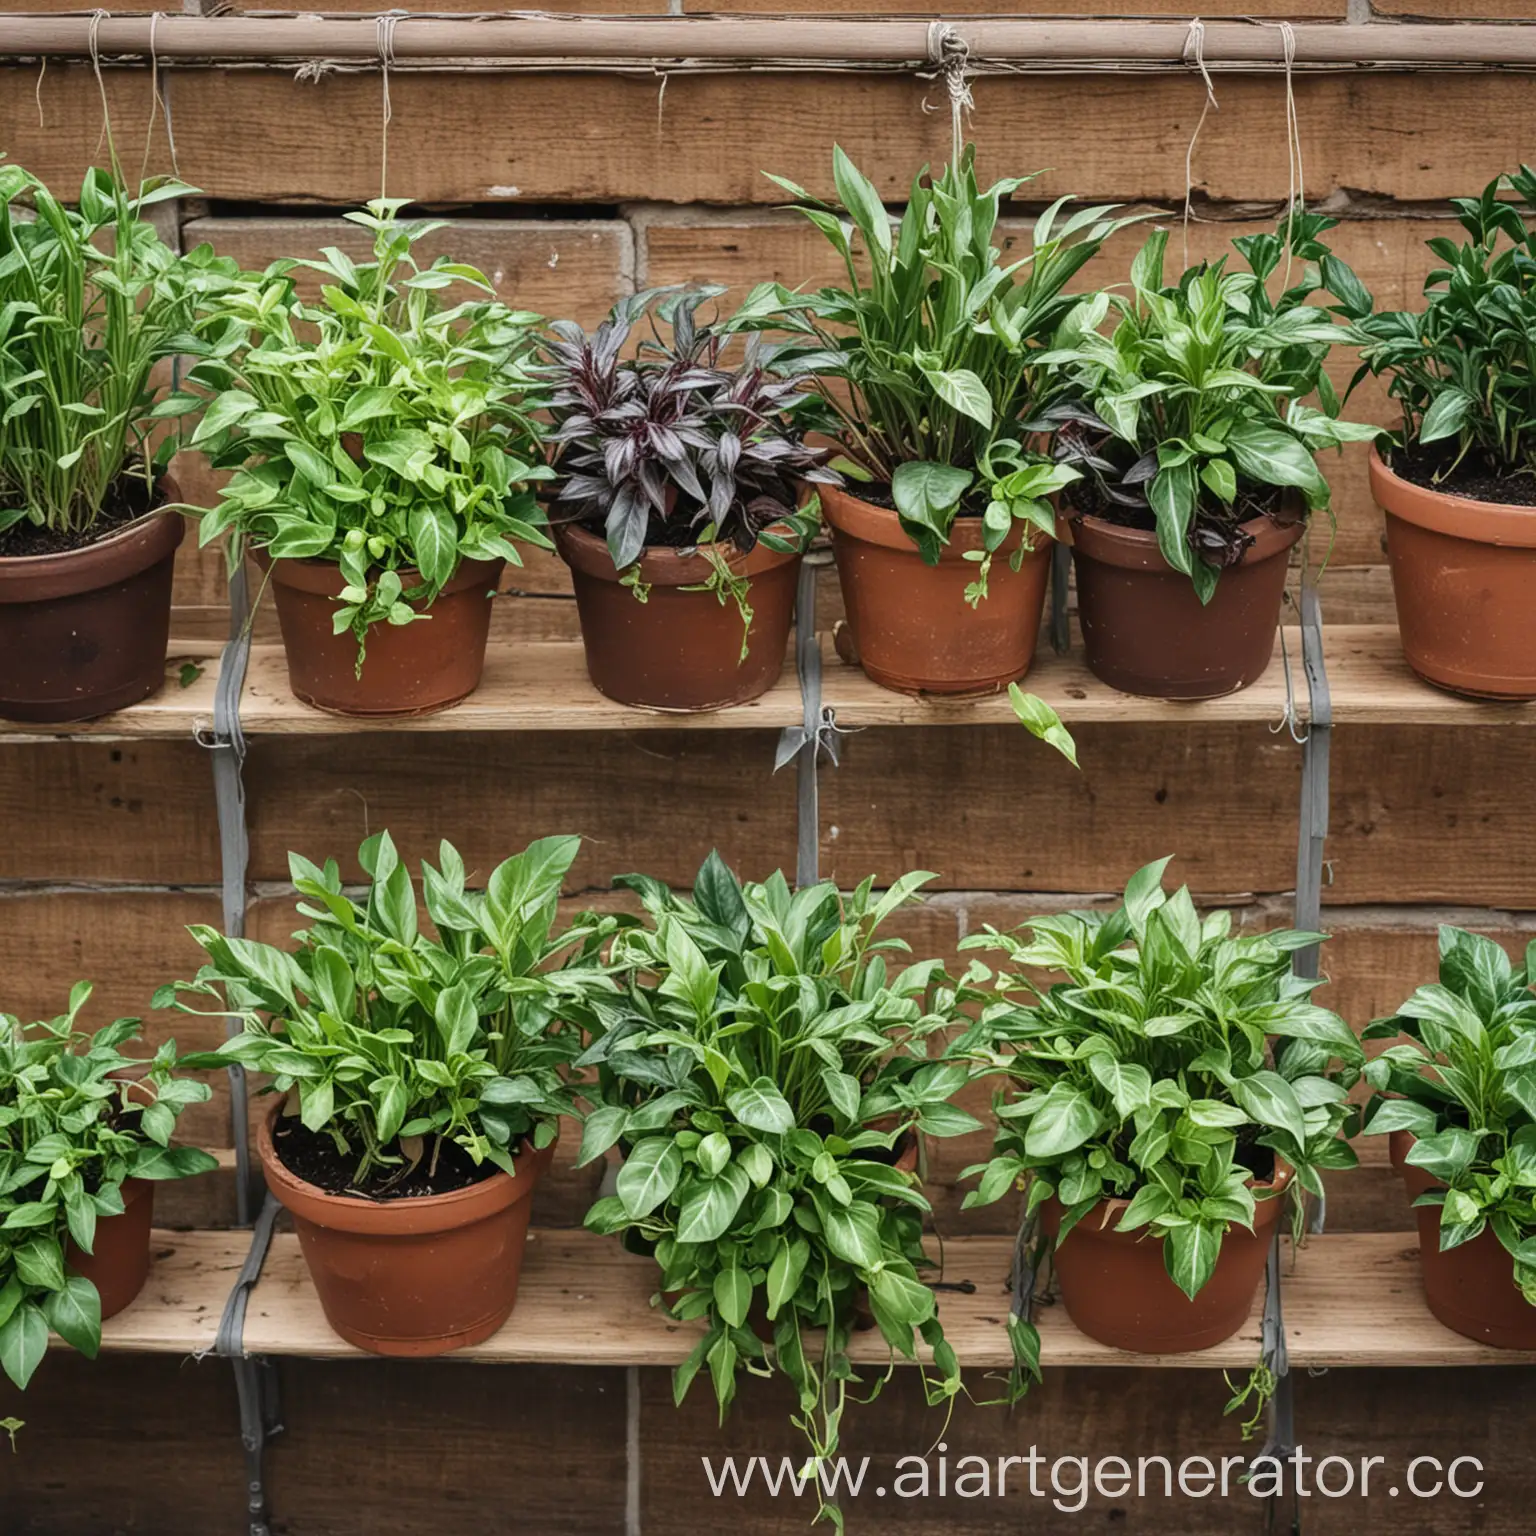 Indoor-Gardening-Cultivating-a-Variety-of-Houseplants